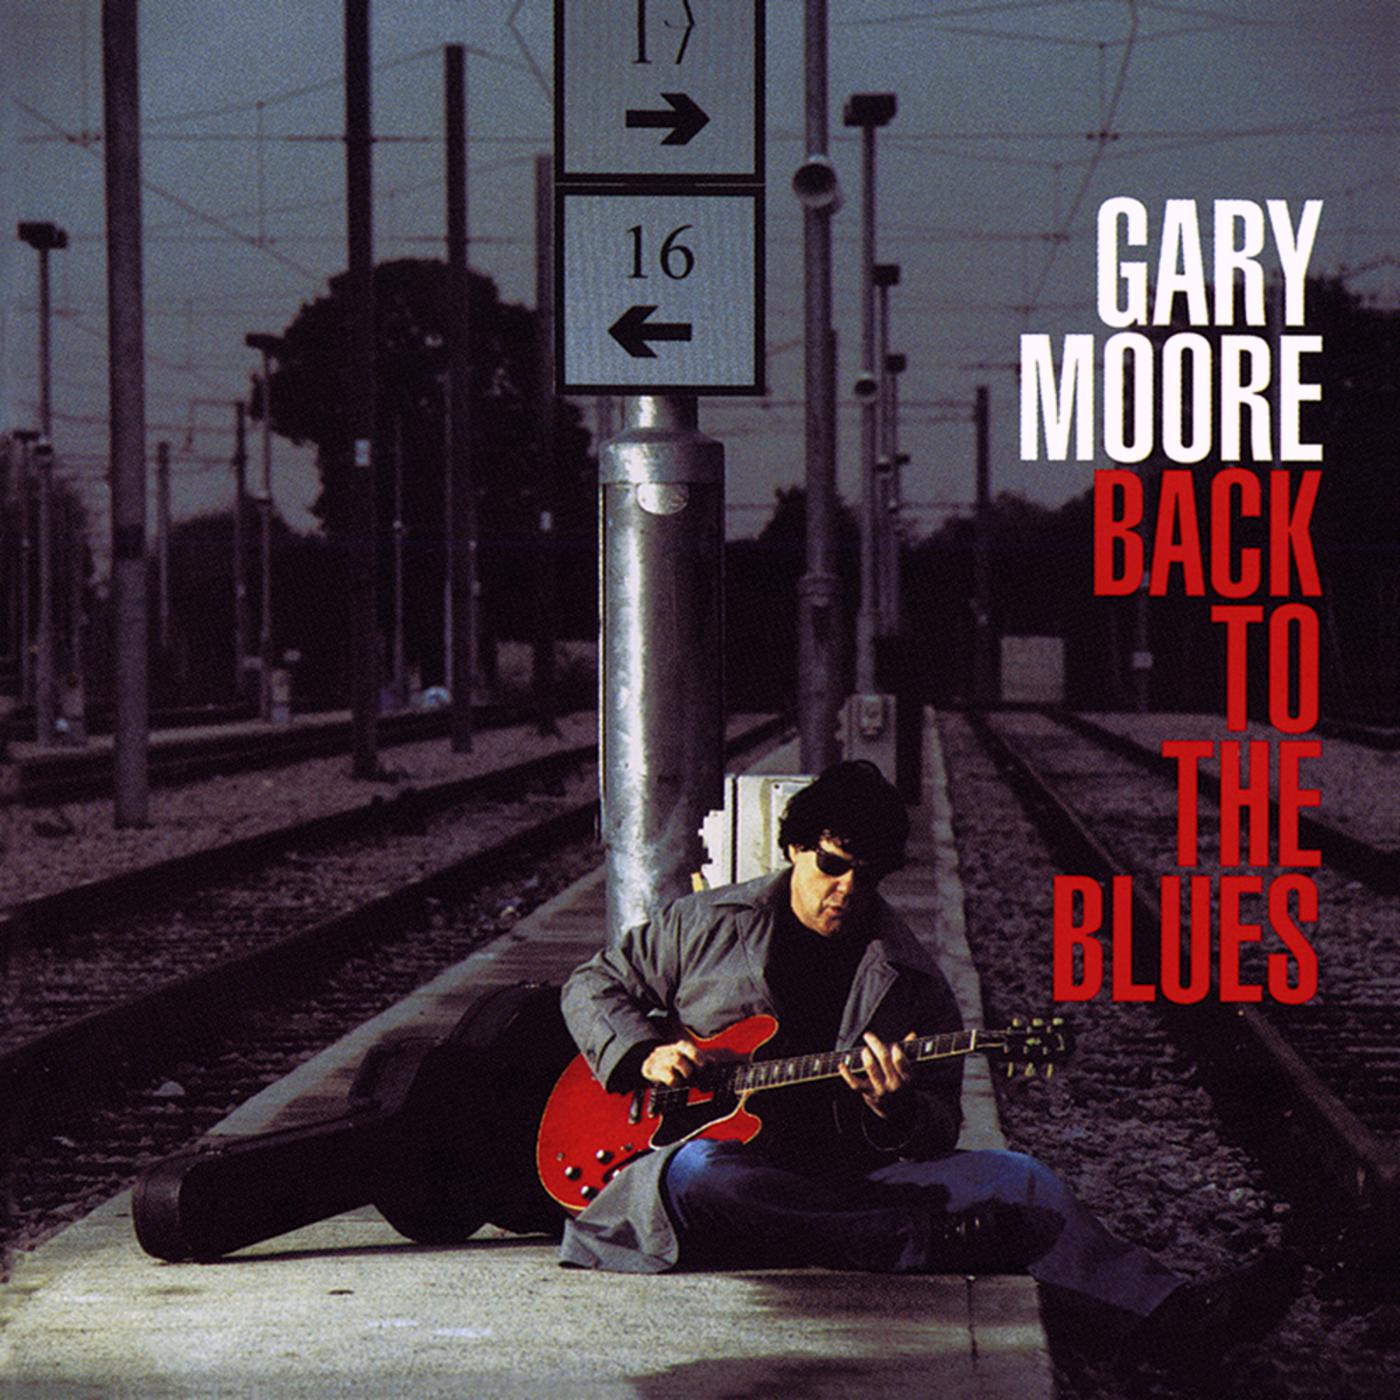 Picture of the Moon歌词 歌手Gary Moore-专辑Back to the Blues-单曲《Picture of the Moon》LRC歌词下载